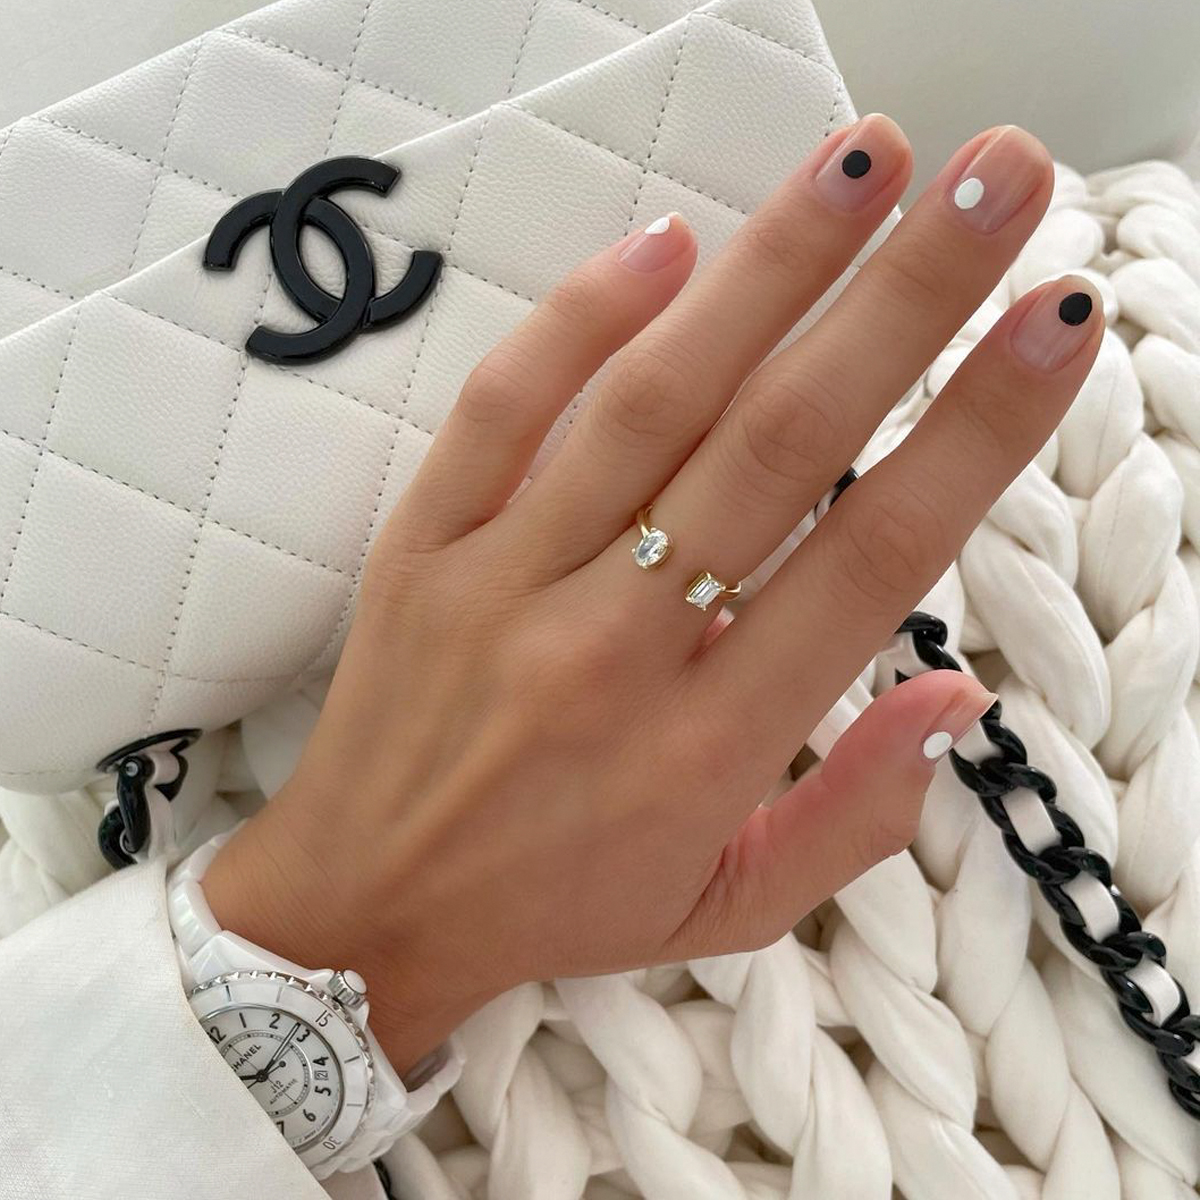 The 5 Best Chanel Nail Polishes, According to the Experts | Who What Wear UK